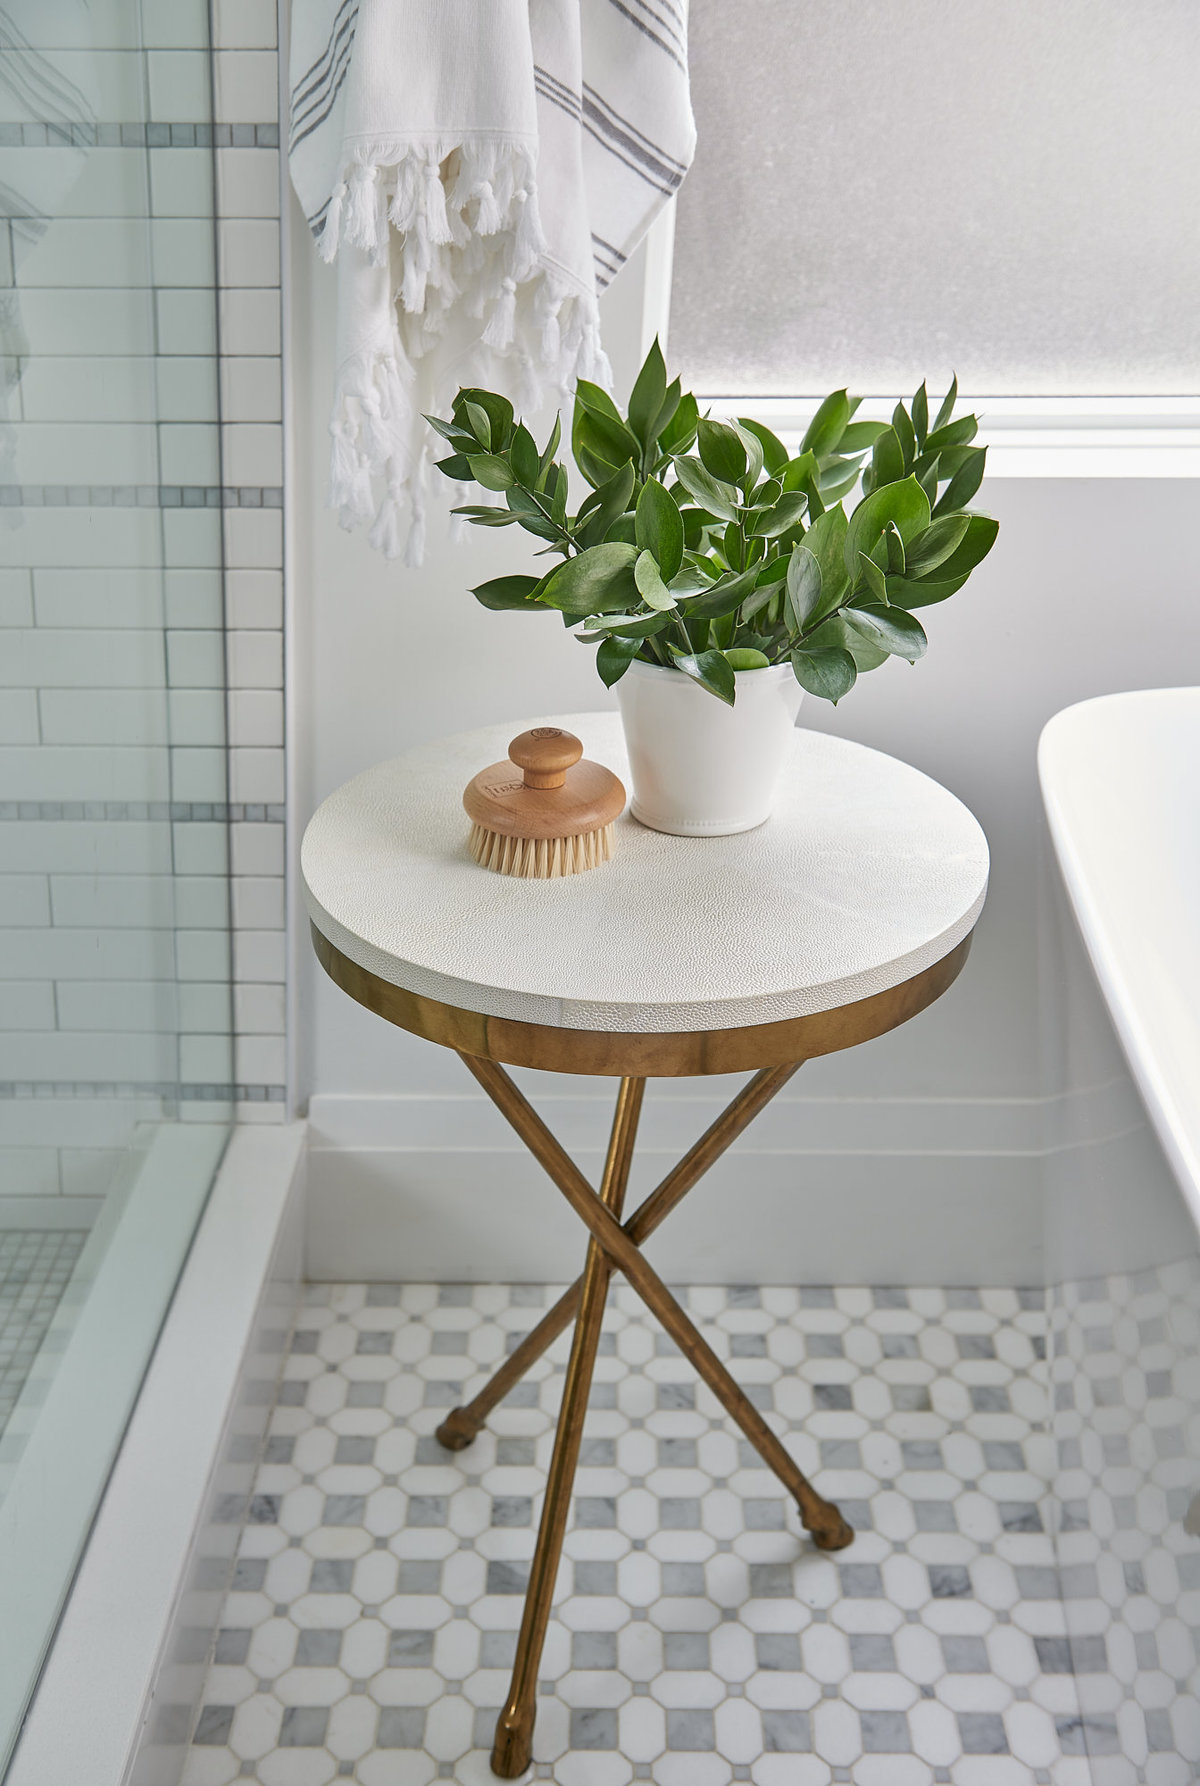 Bathroom with marble mosaic floor and gold side table styled with plant